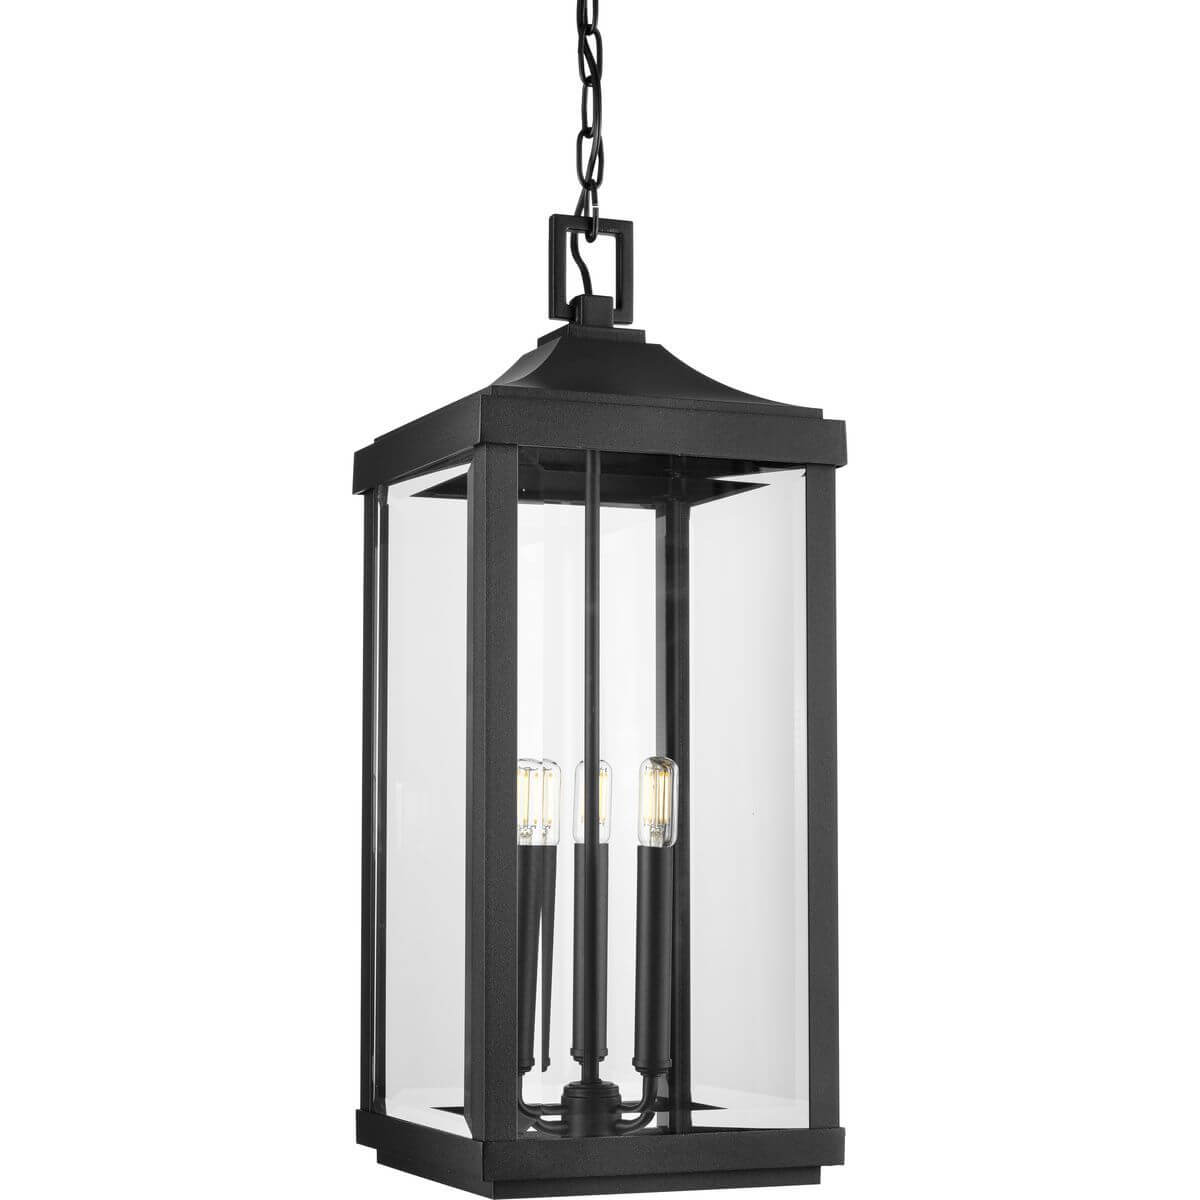 Progress Lighting P550004-031 Gibbes Street 3 Light 10 inch Outdoor Hanging Lantern in Textured Black with Clear Beveled Glass Panel